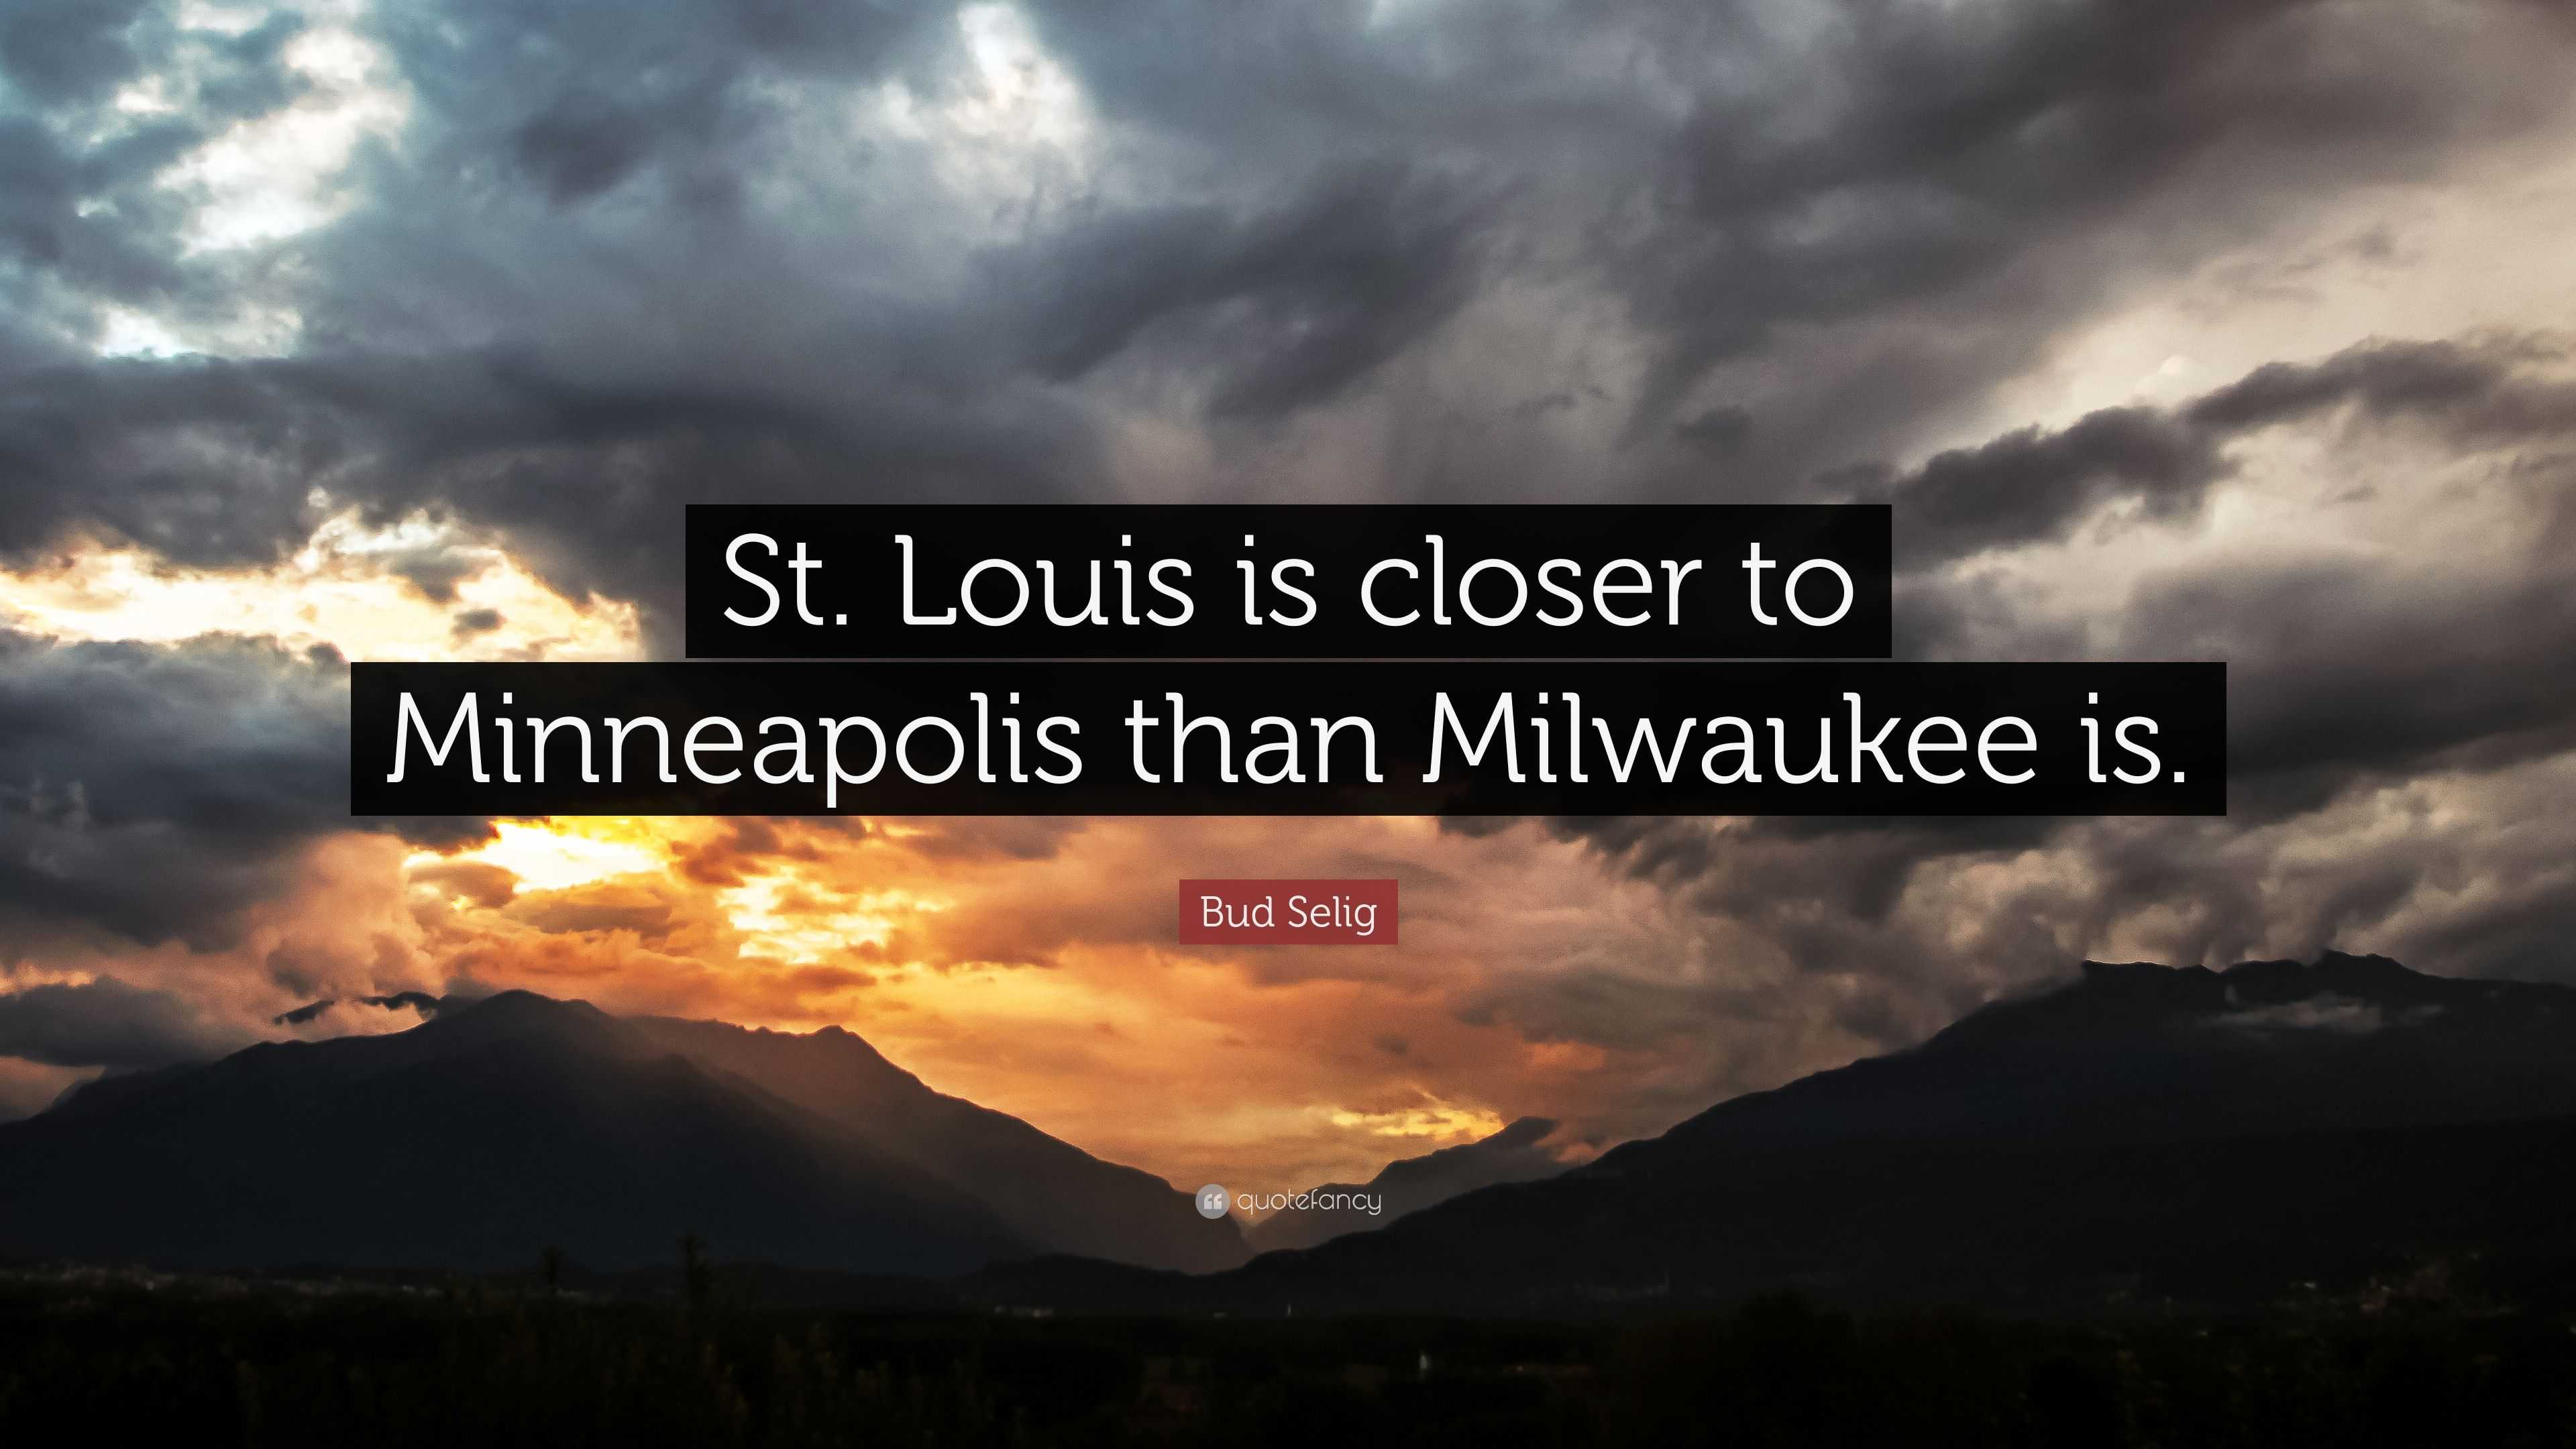 Bud Selig Quote: “St. Louis is closer to Minneapolis than Milwaukee is.”